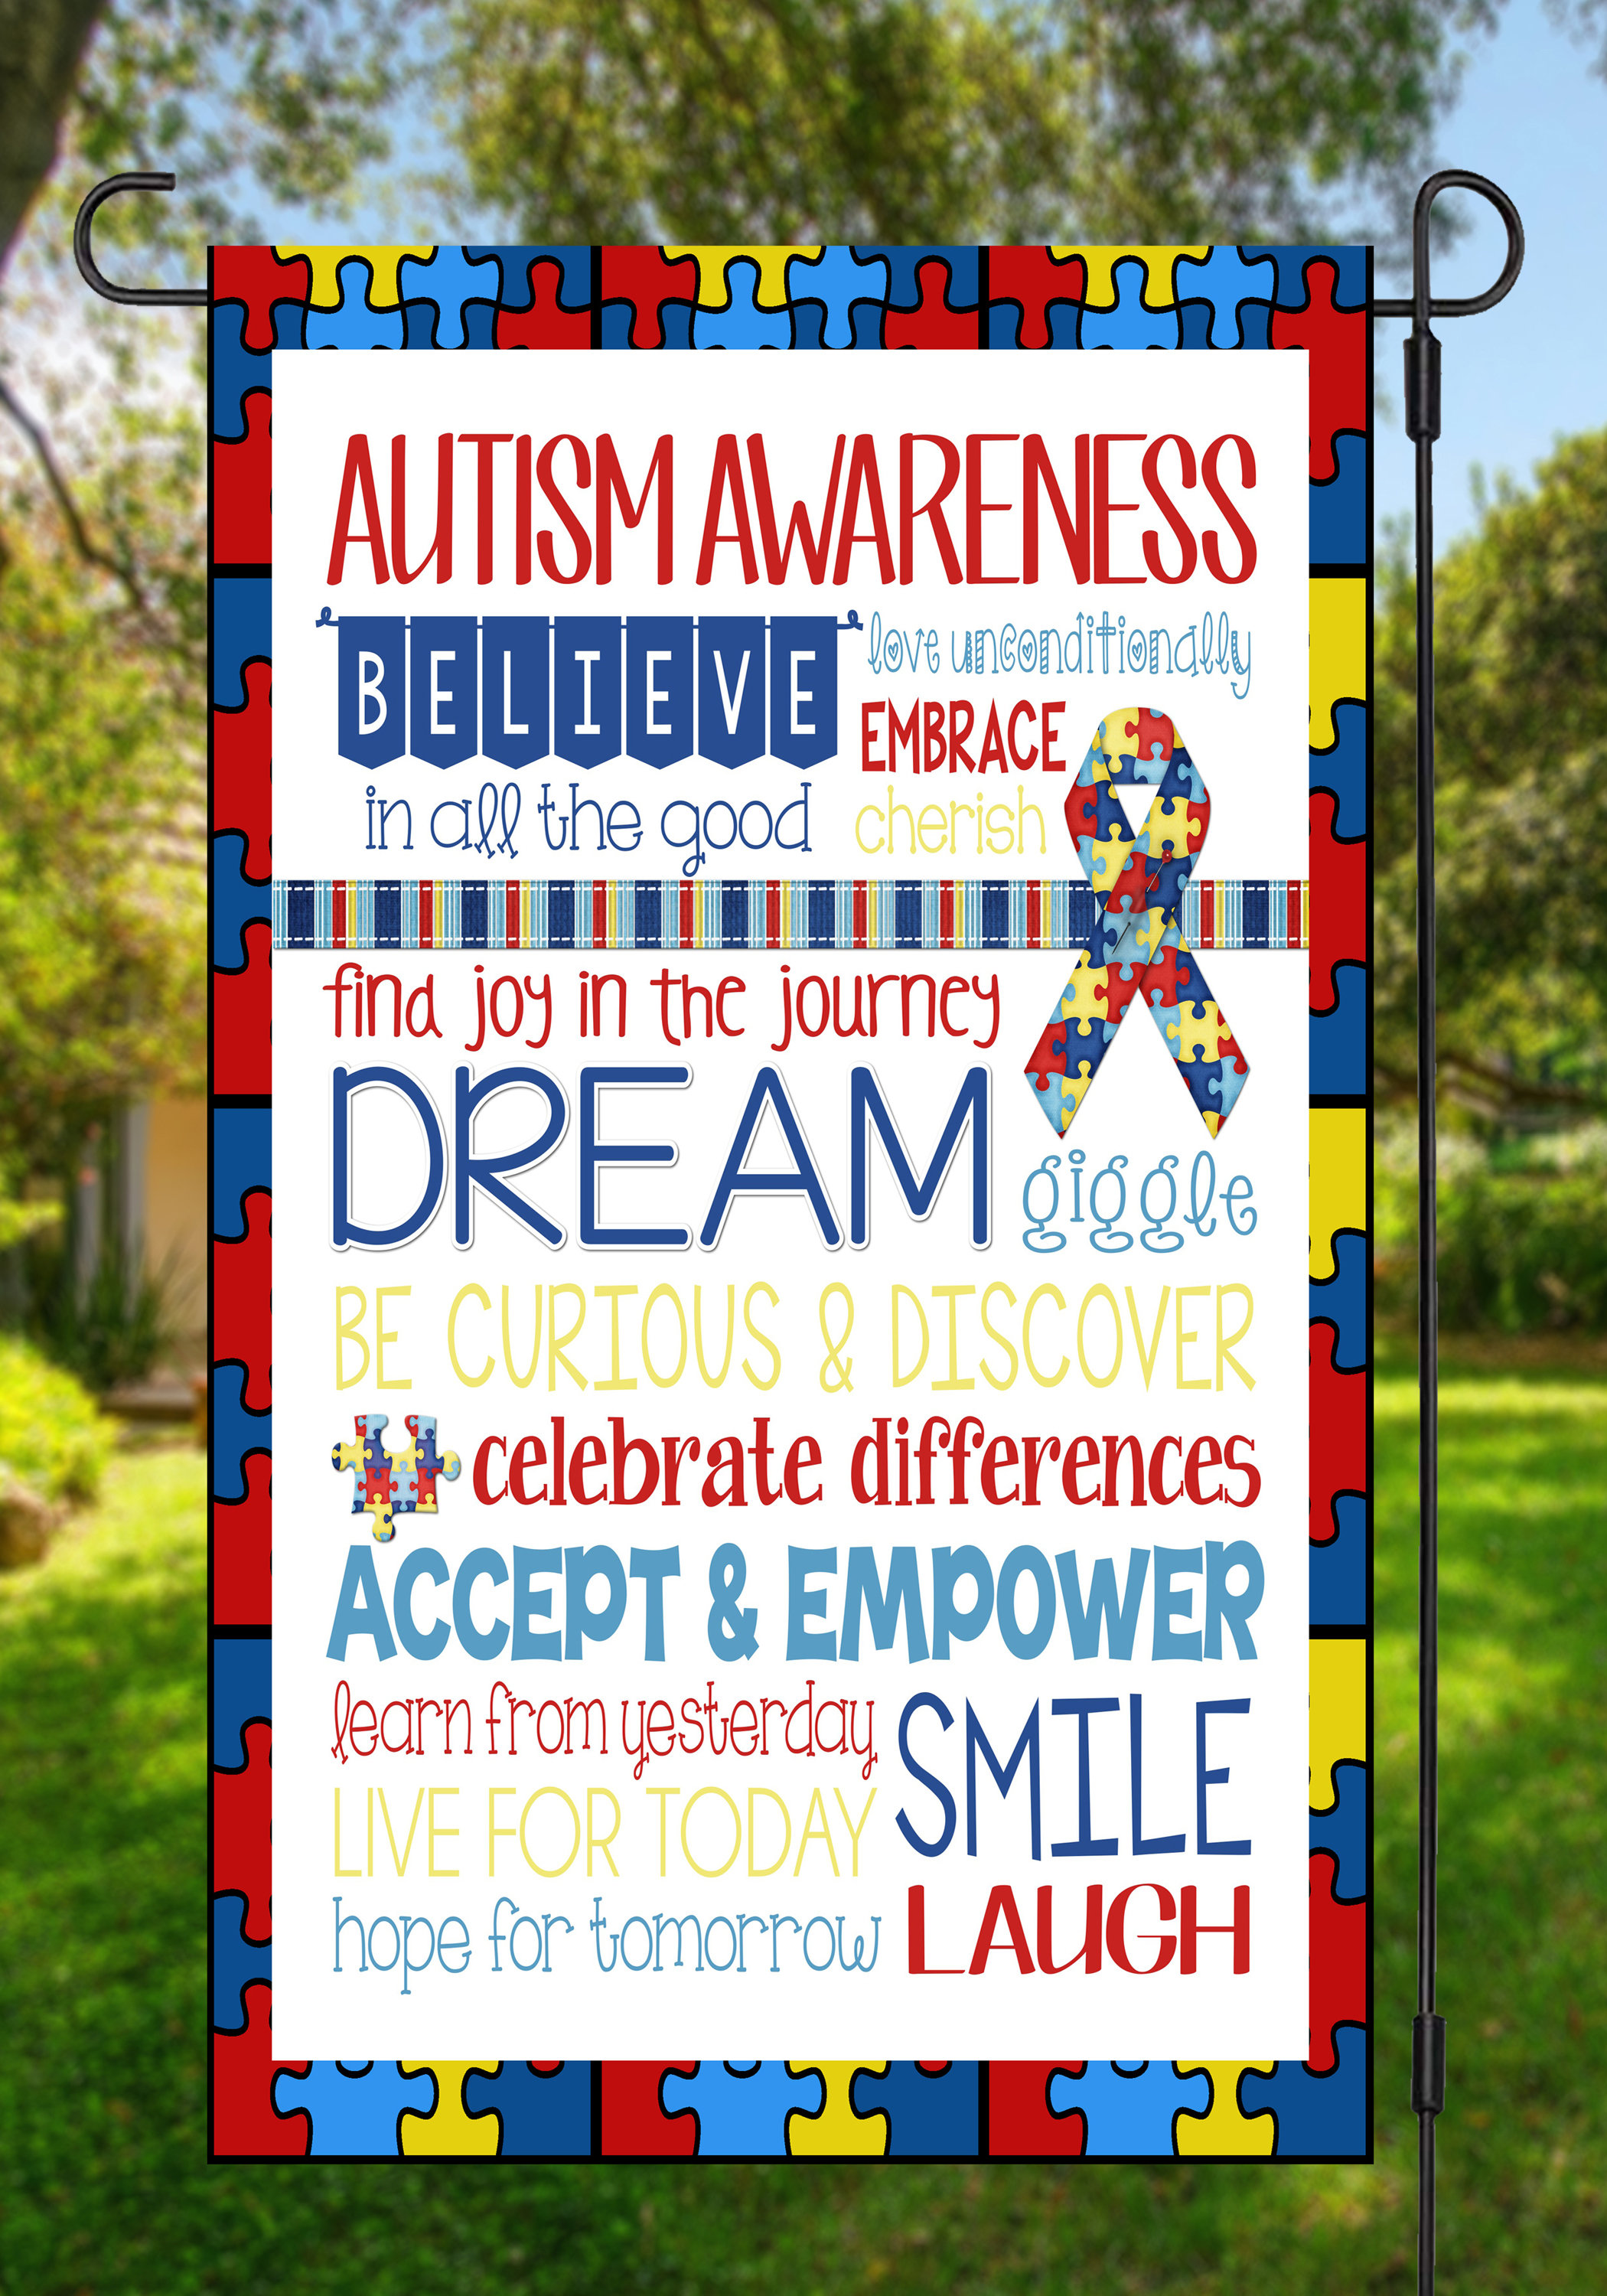 Details about   Support Autism Day Garden Flag Awareness Decorative Small Gift Yard House Banner